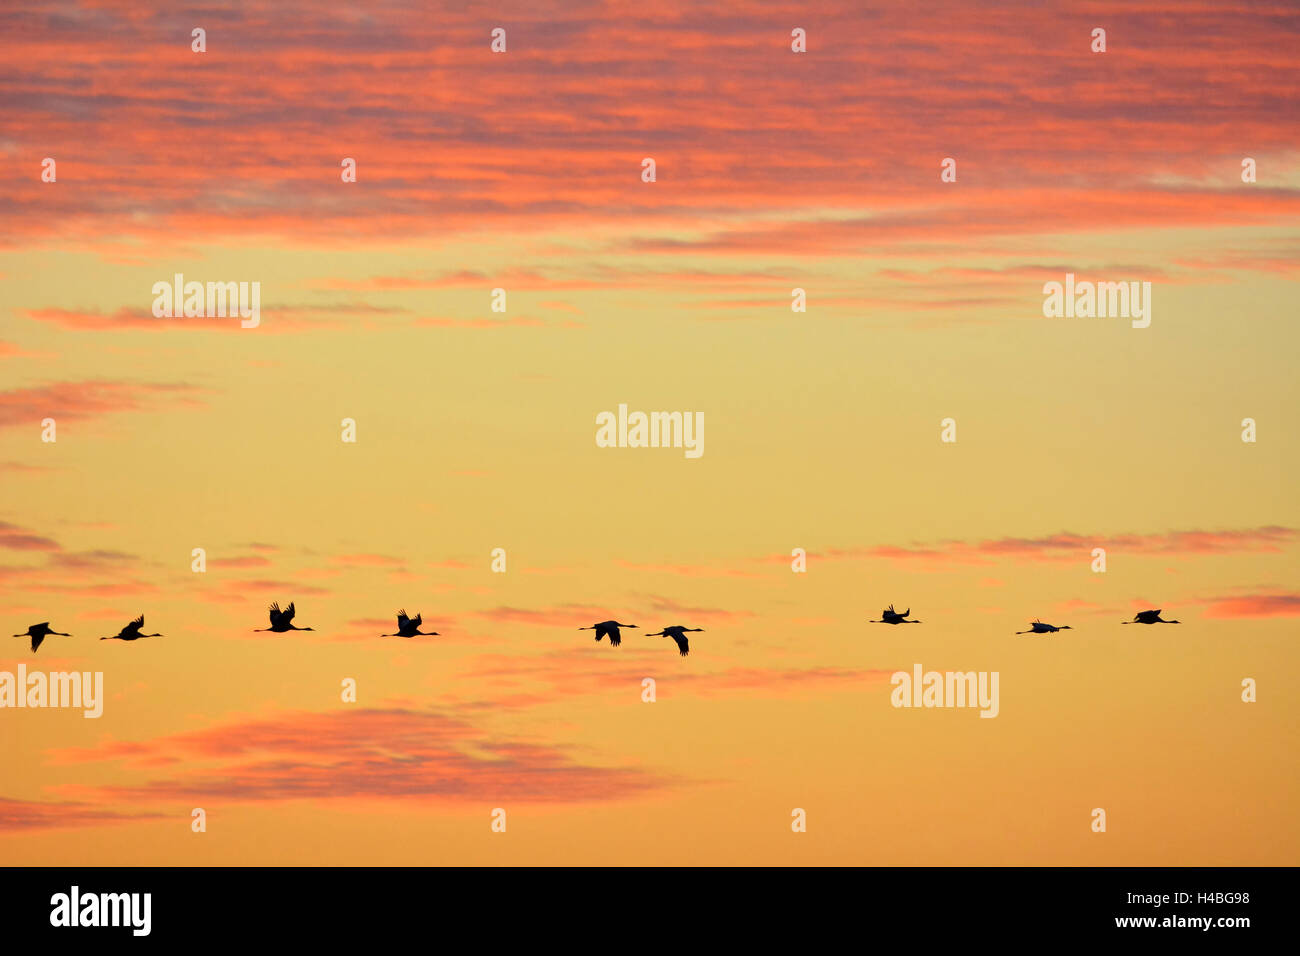 Common Cranes, Grus grus, in Formation Flight, at Sunset, Zingst, Barther Bodden, Darss, Fischland-Darss-Zingst, Western Pomerania, Germany, Europe Stock Photo